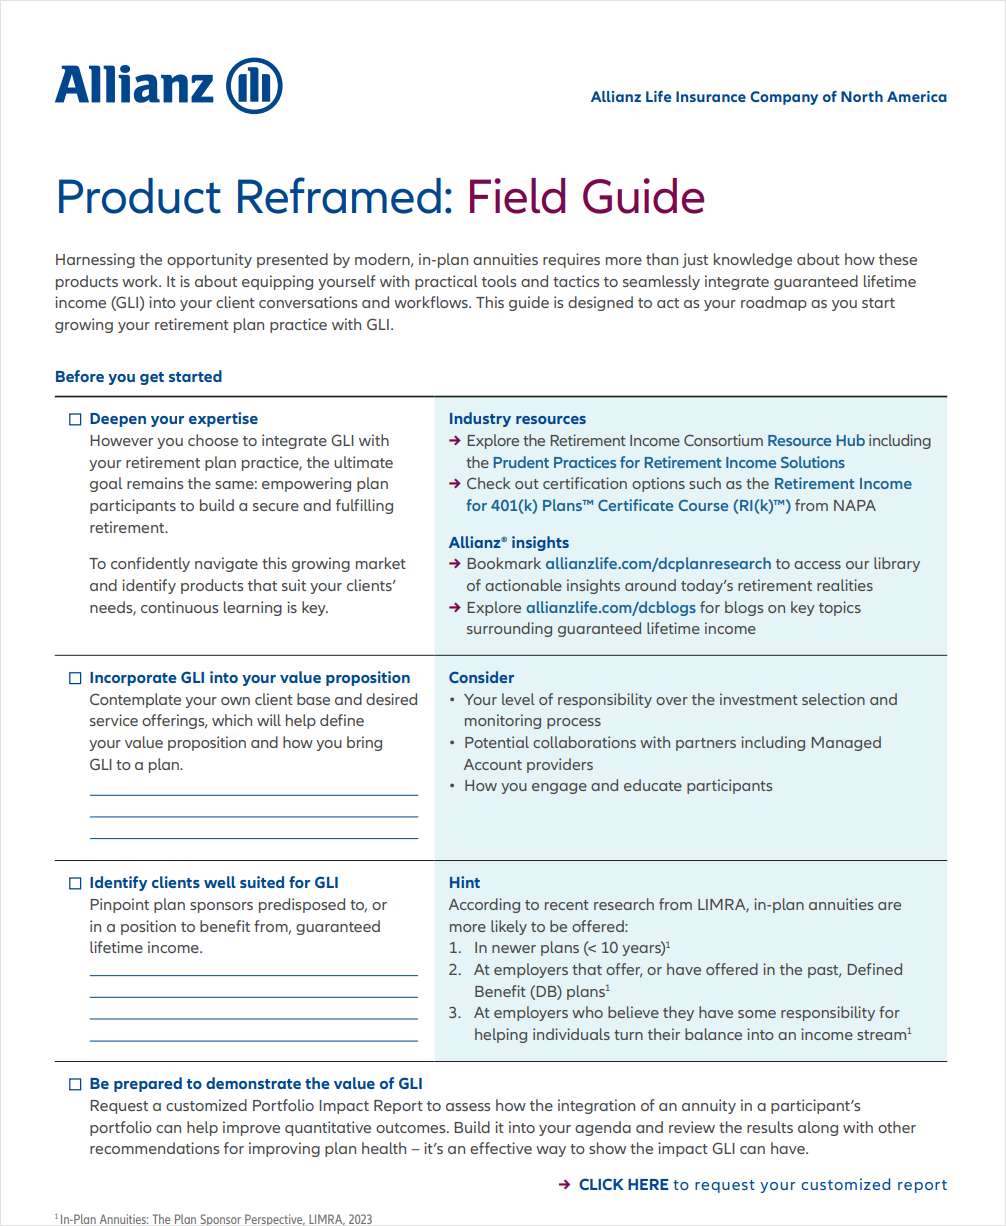 Field Guide: Your Roadmap to Integrating Guaranteed Lifetime Income